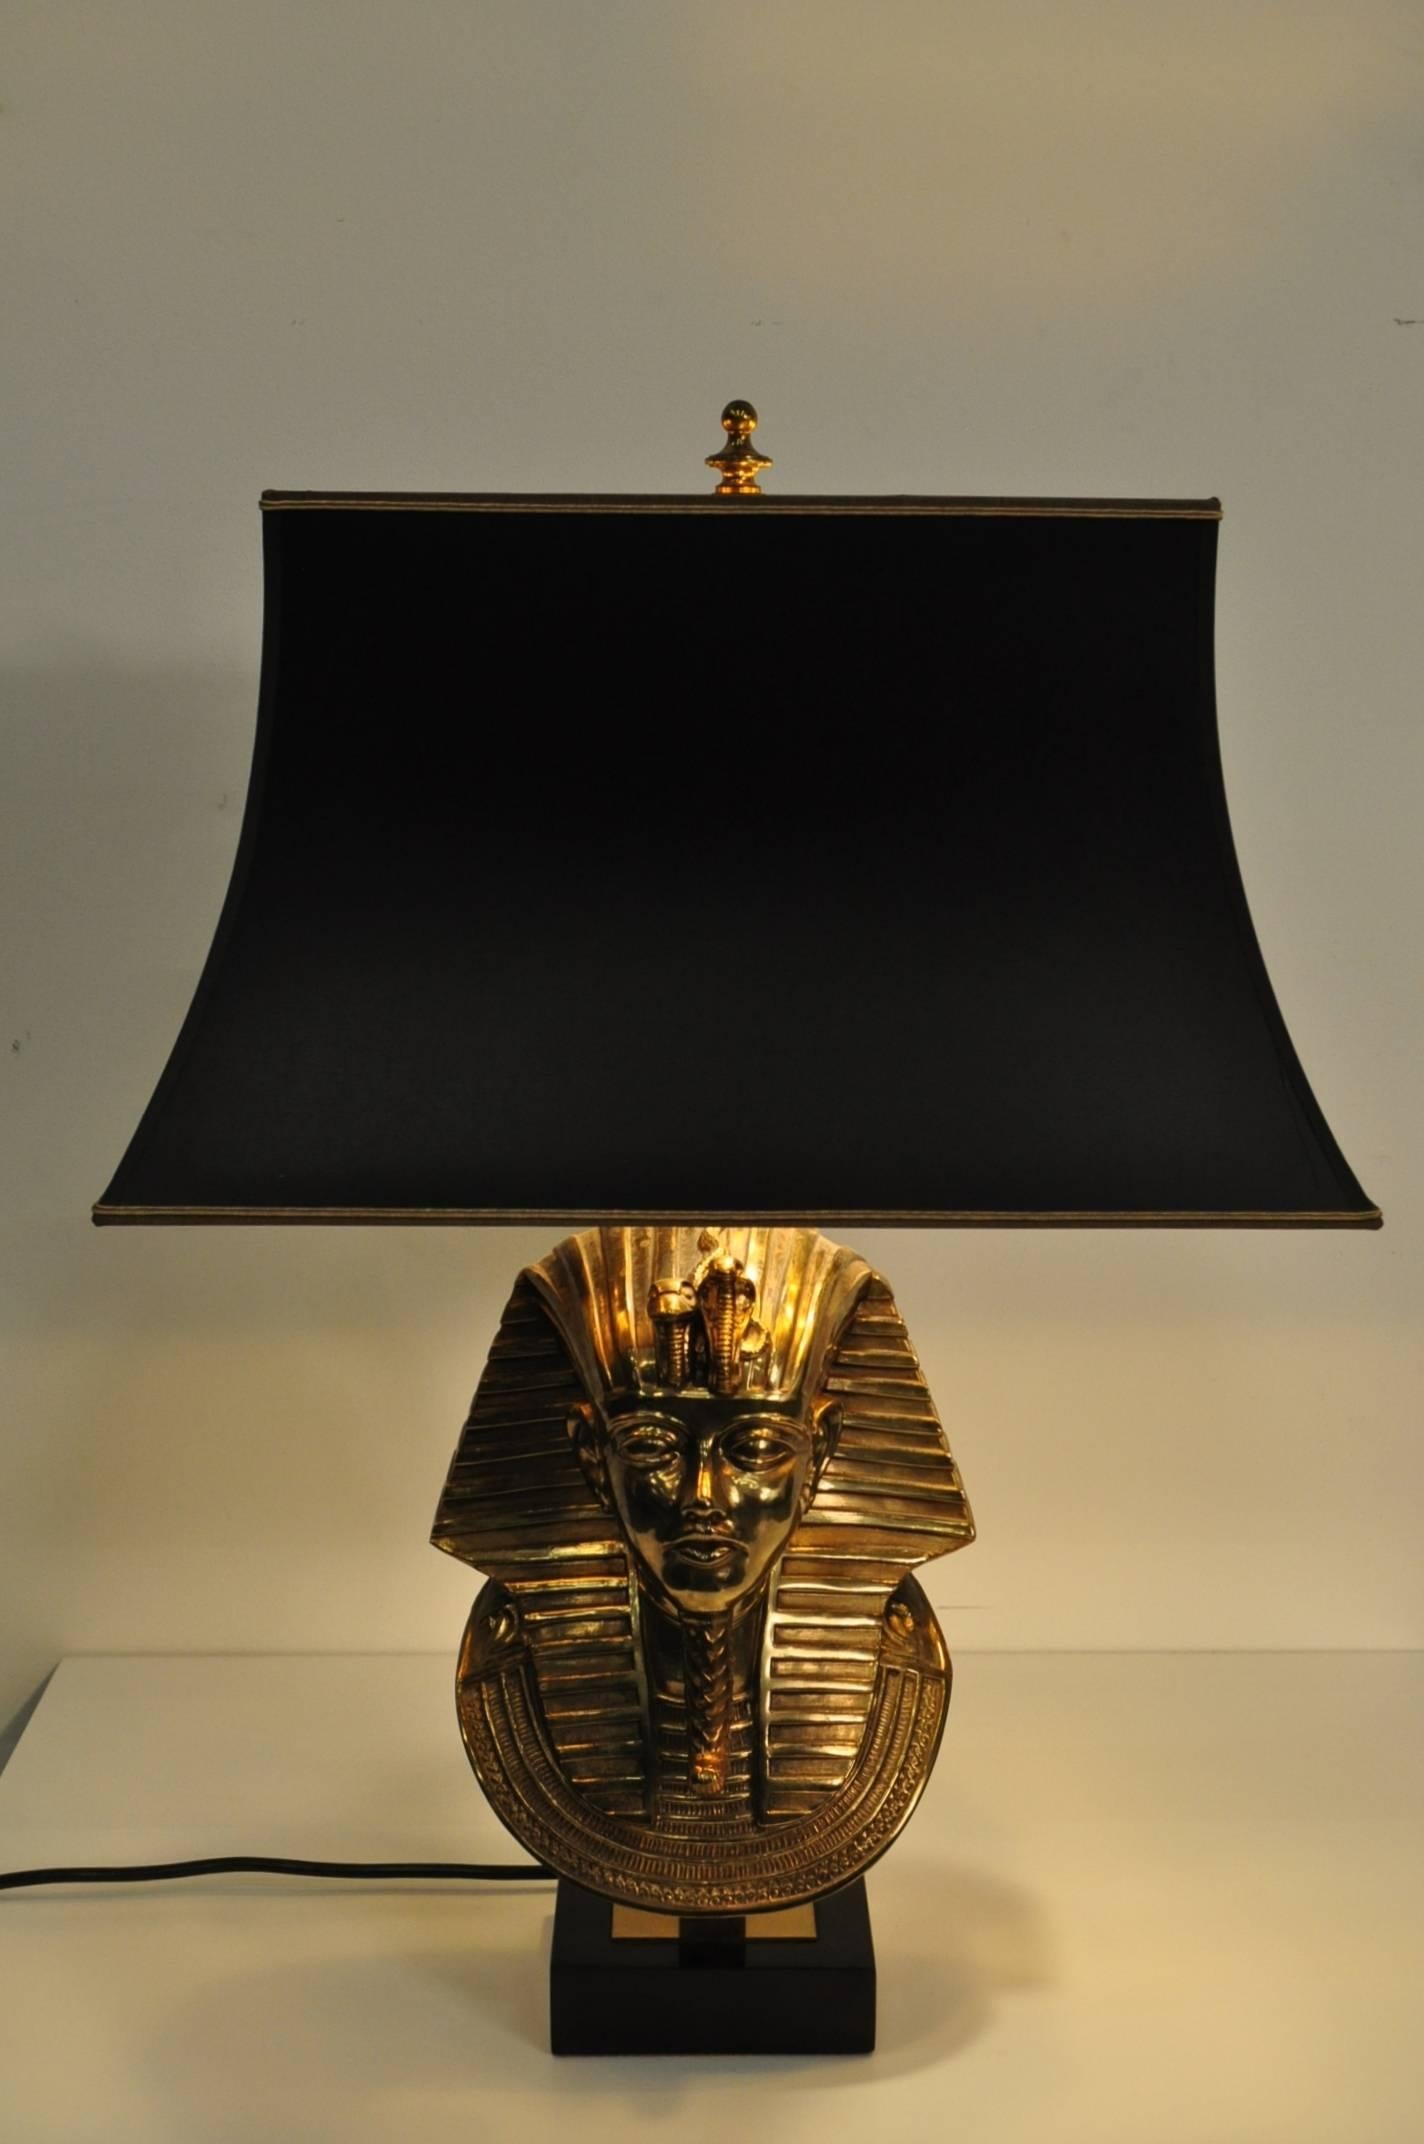 Eye-catching lamp with brass pharaoh sculpture, designed by Maison Jansen for Deknudt in Belgium around 1970.

This stunning piece is made of high quality 24-karat gold-plated brass on a black marble base. It has a black fabric hood with beautiful